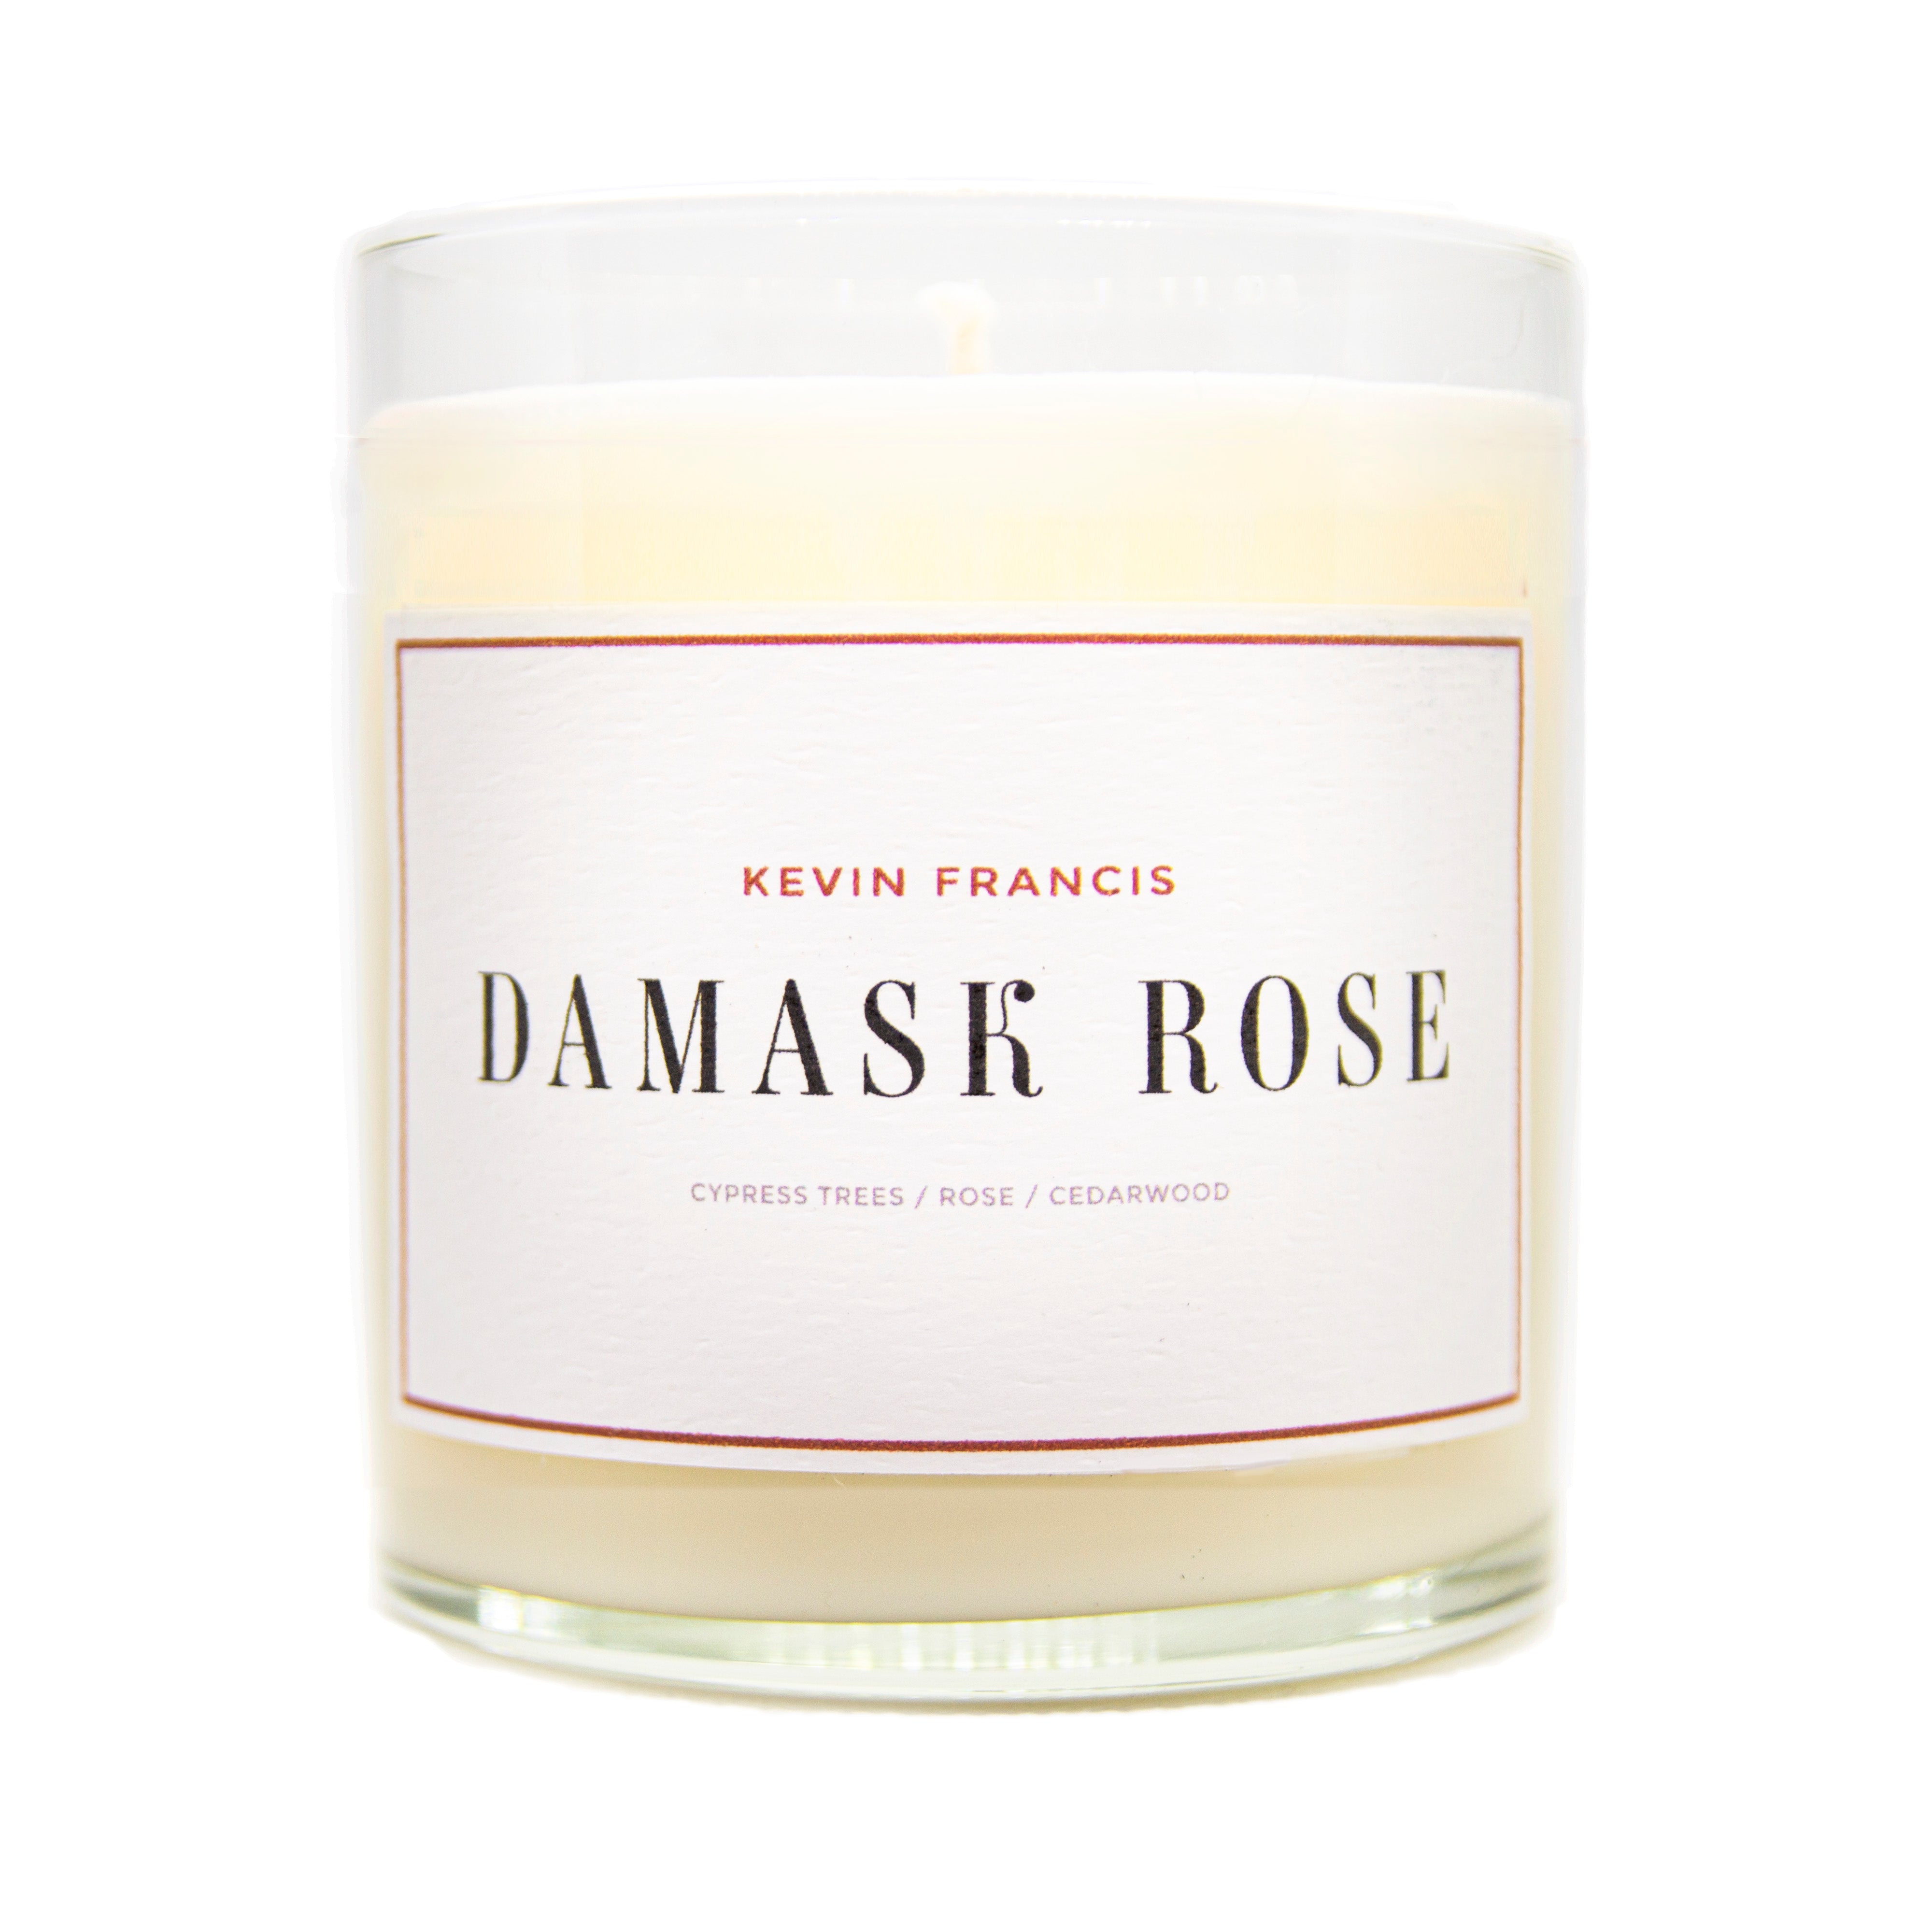 Damask Rose Scented Luxury Candle by Kevin Francis Design | Luxury Home Decor